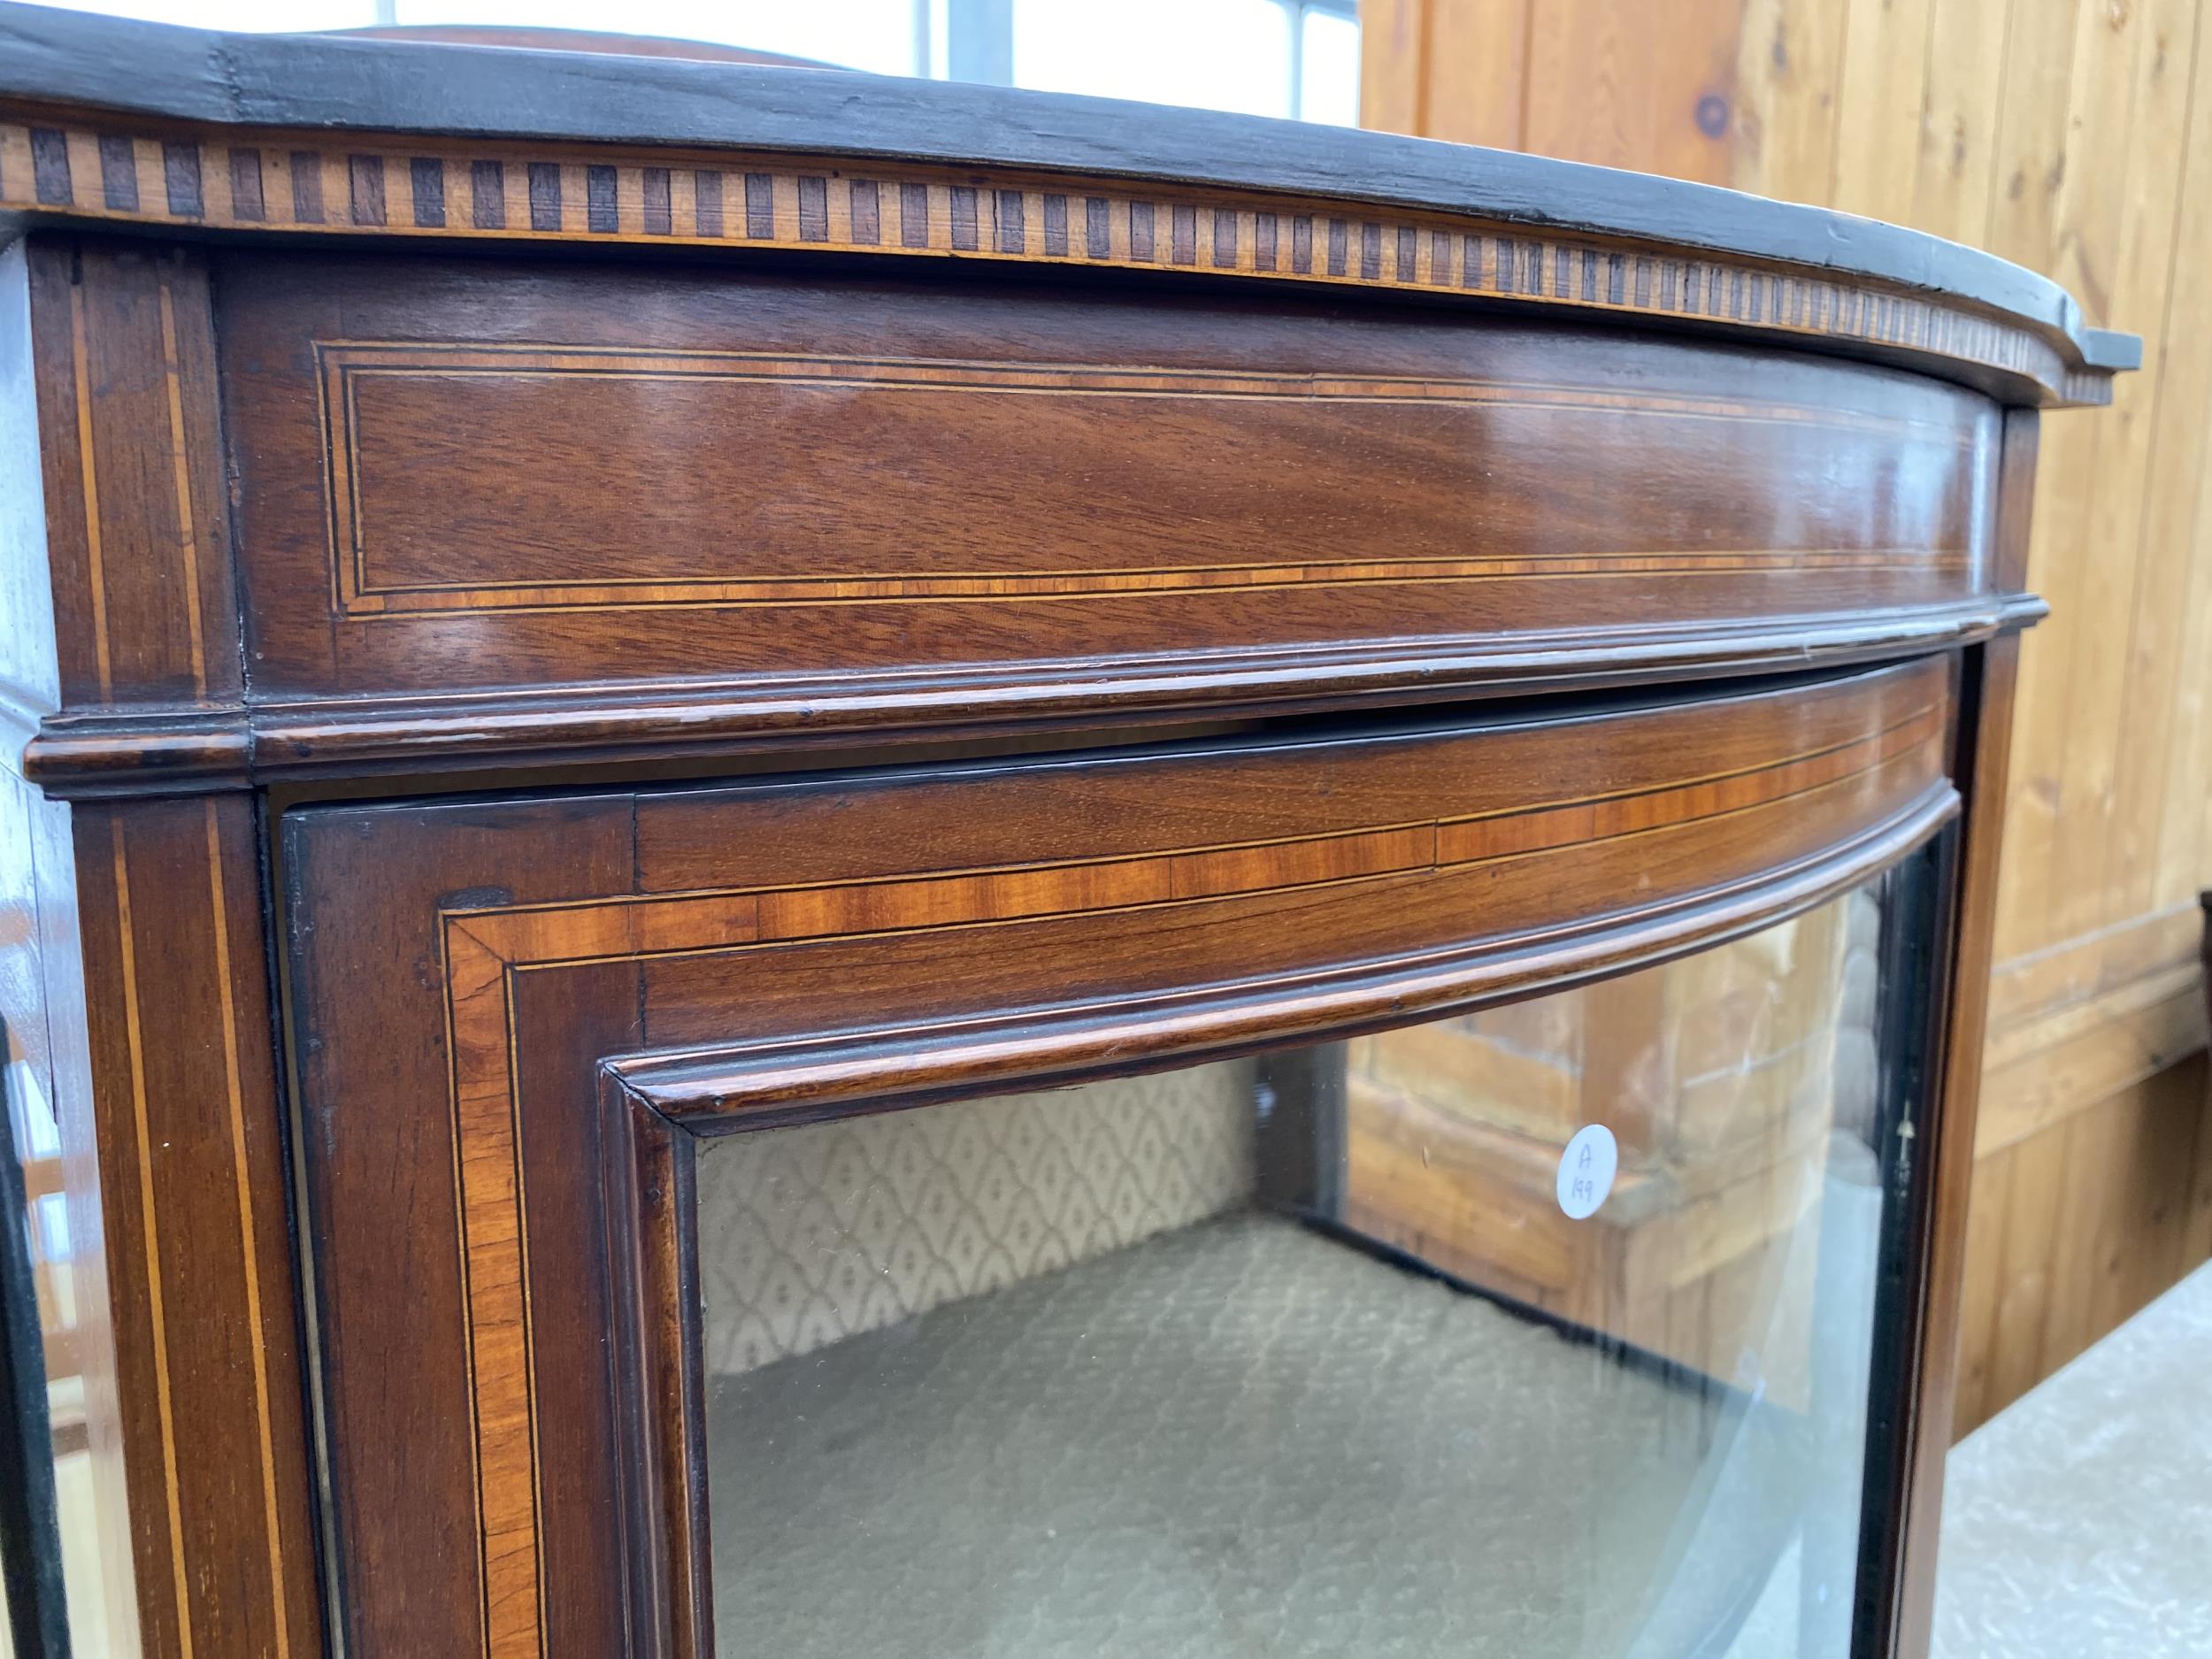 AN EDWARDIAN MAHOGANY AND INLAID BOWFRONTED DISPLAY CABINET, 23" WIDE - Image 6 of 7